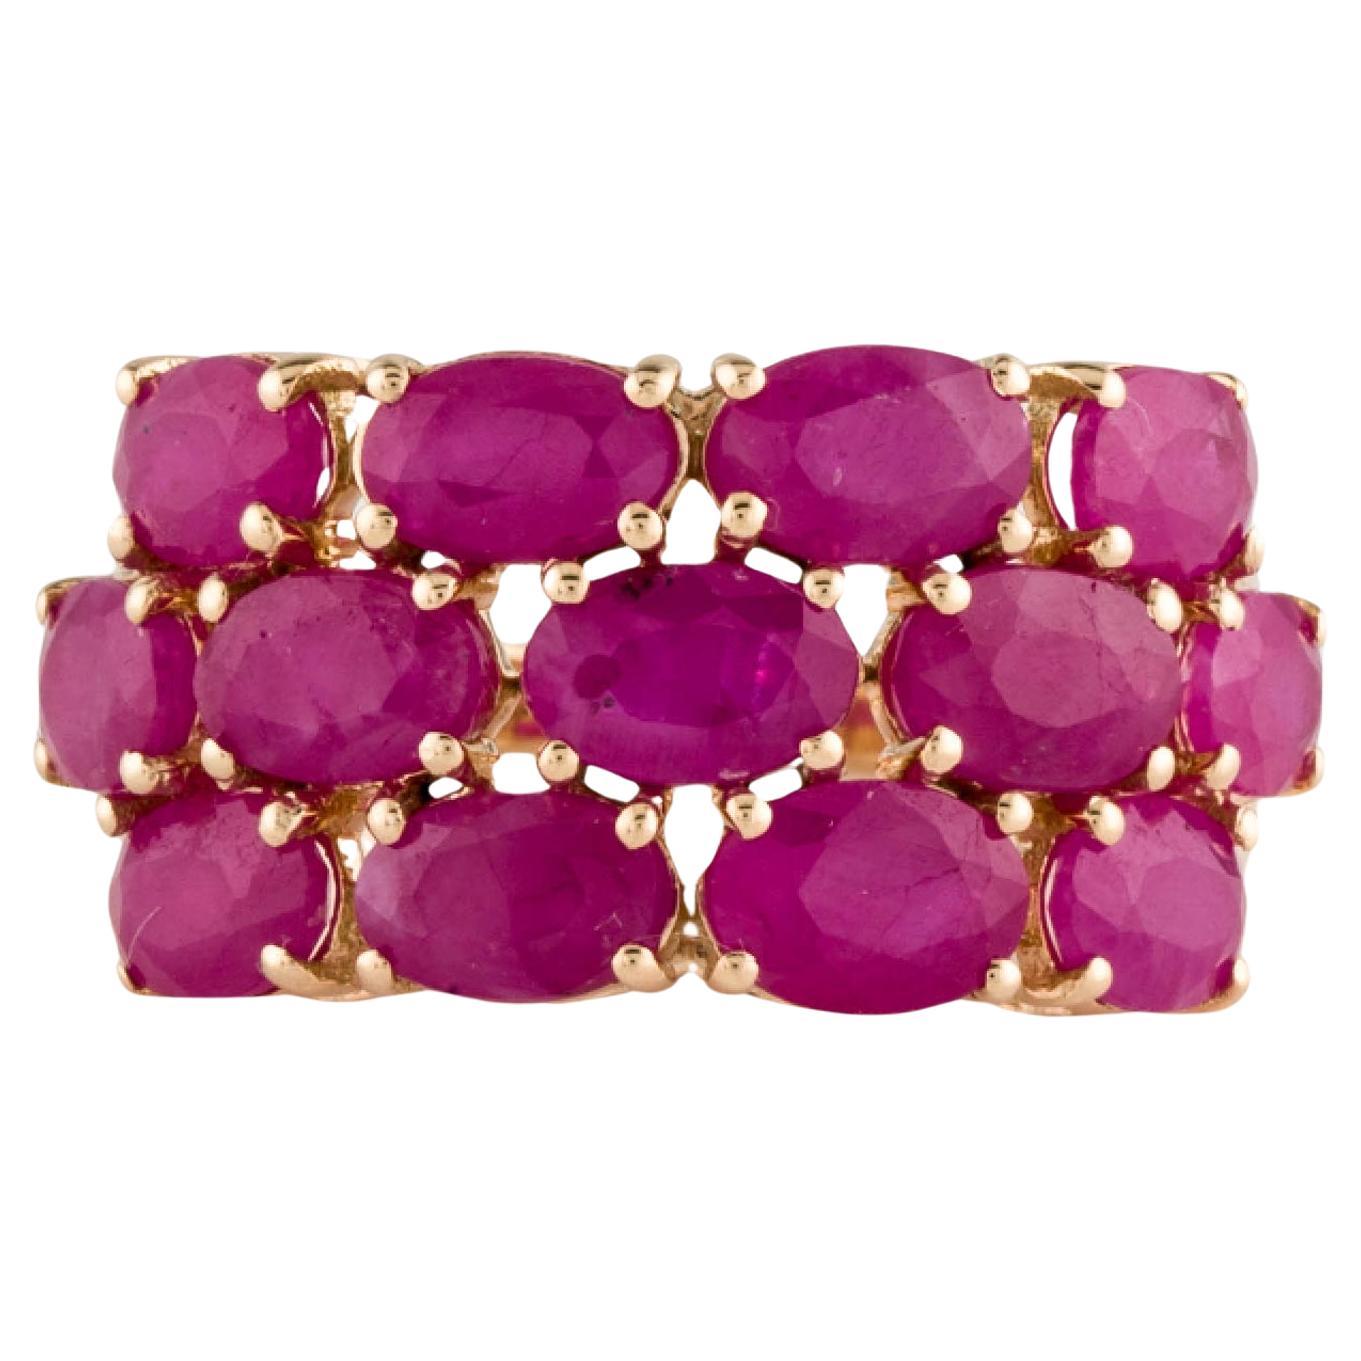 Luxurious 14K Ruby Cocktail Ring - 5.61ctw Gemstones - Size 6.75  Vintage Ring For Sale